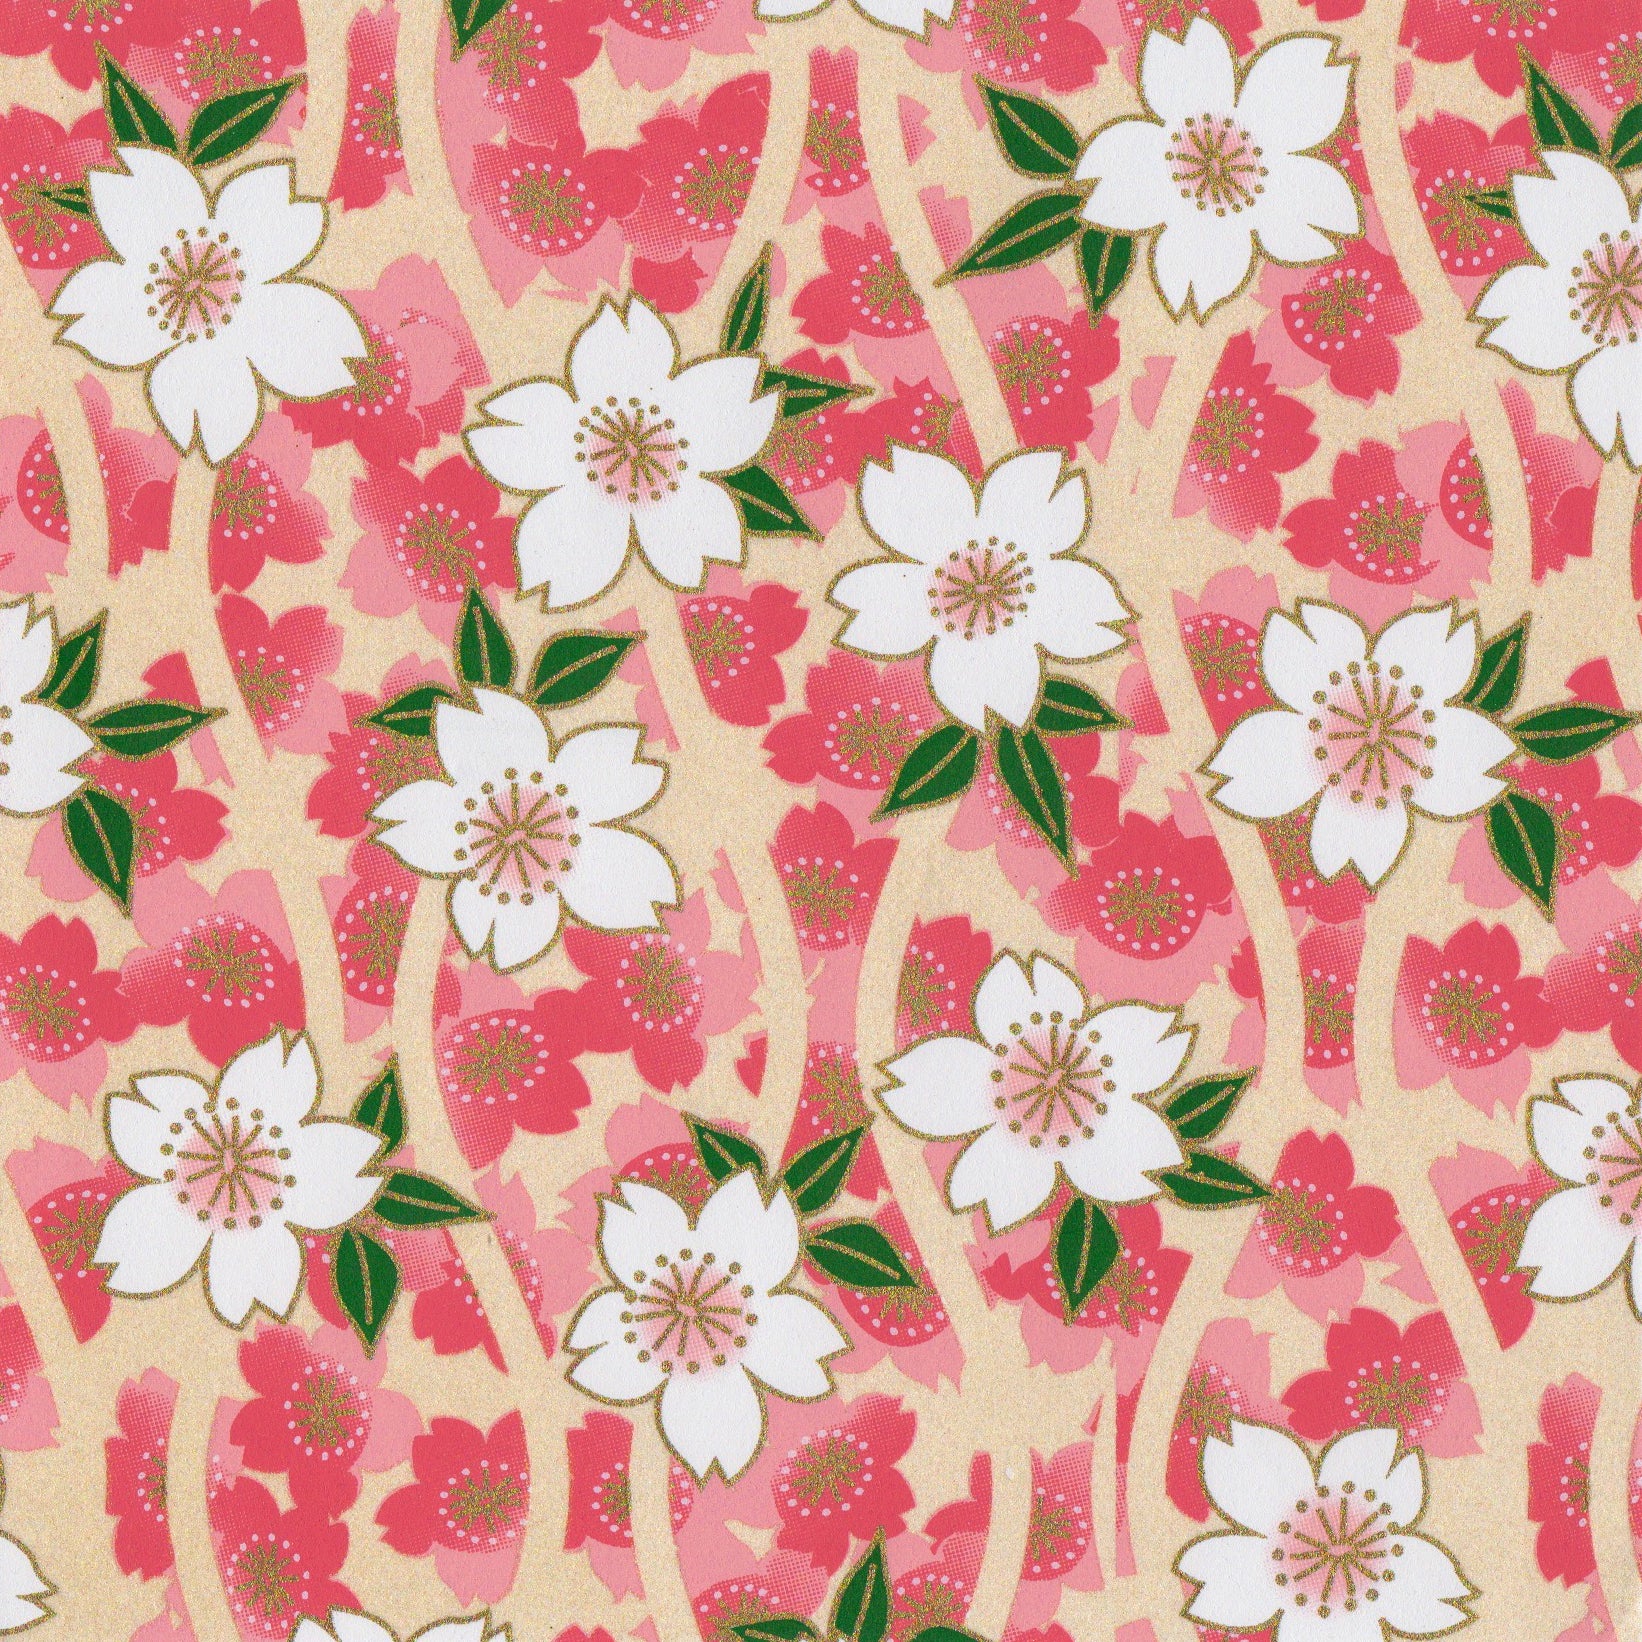 Yuzen Washi Wrapping Paper HZ-412 - Big Cherry Blossom Pink - washi paper - Lavender Home London